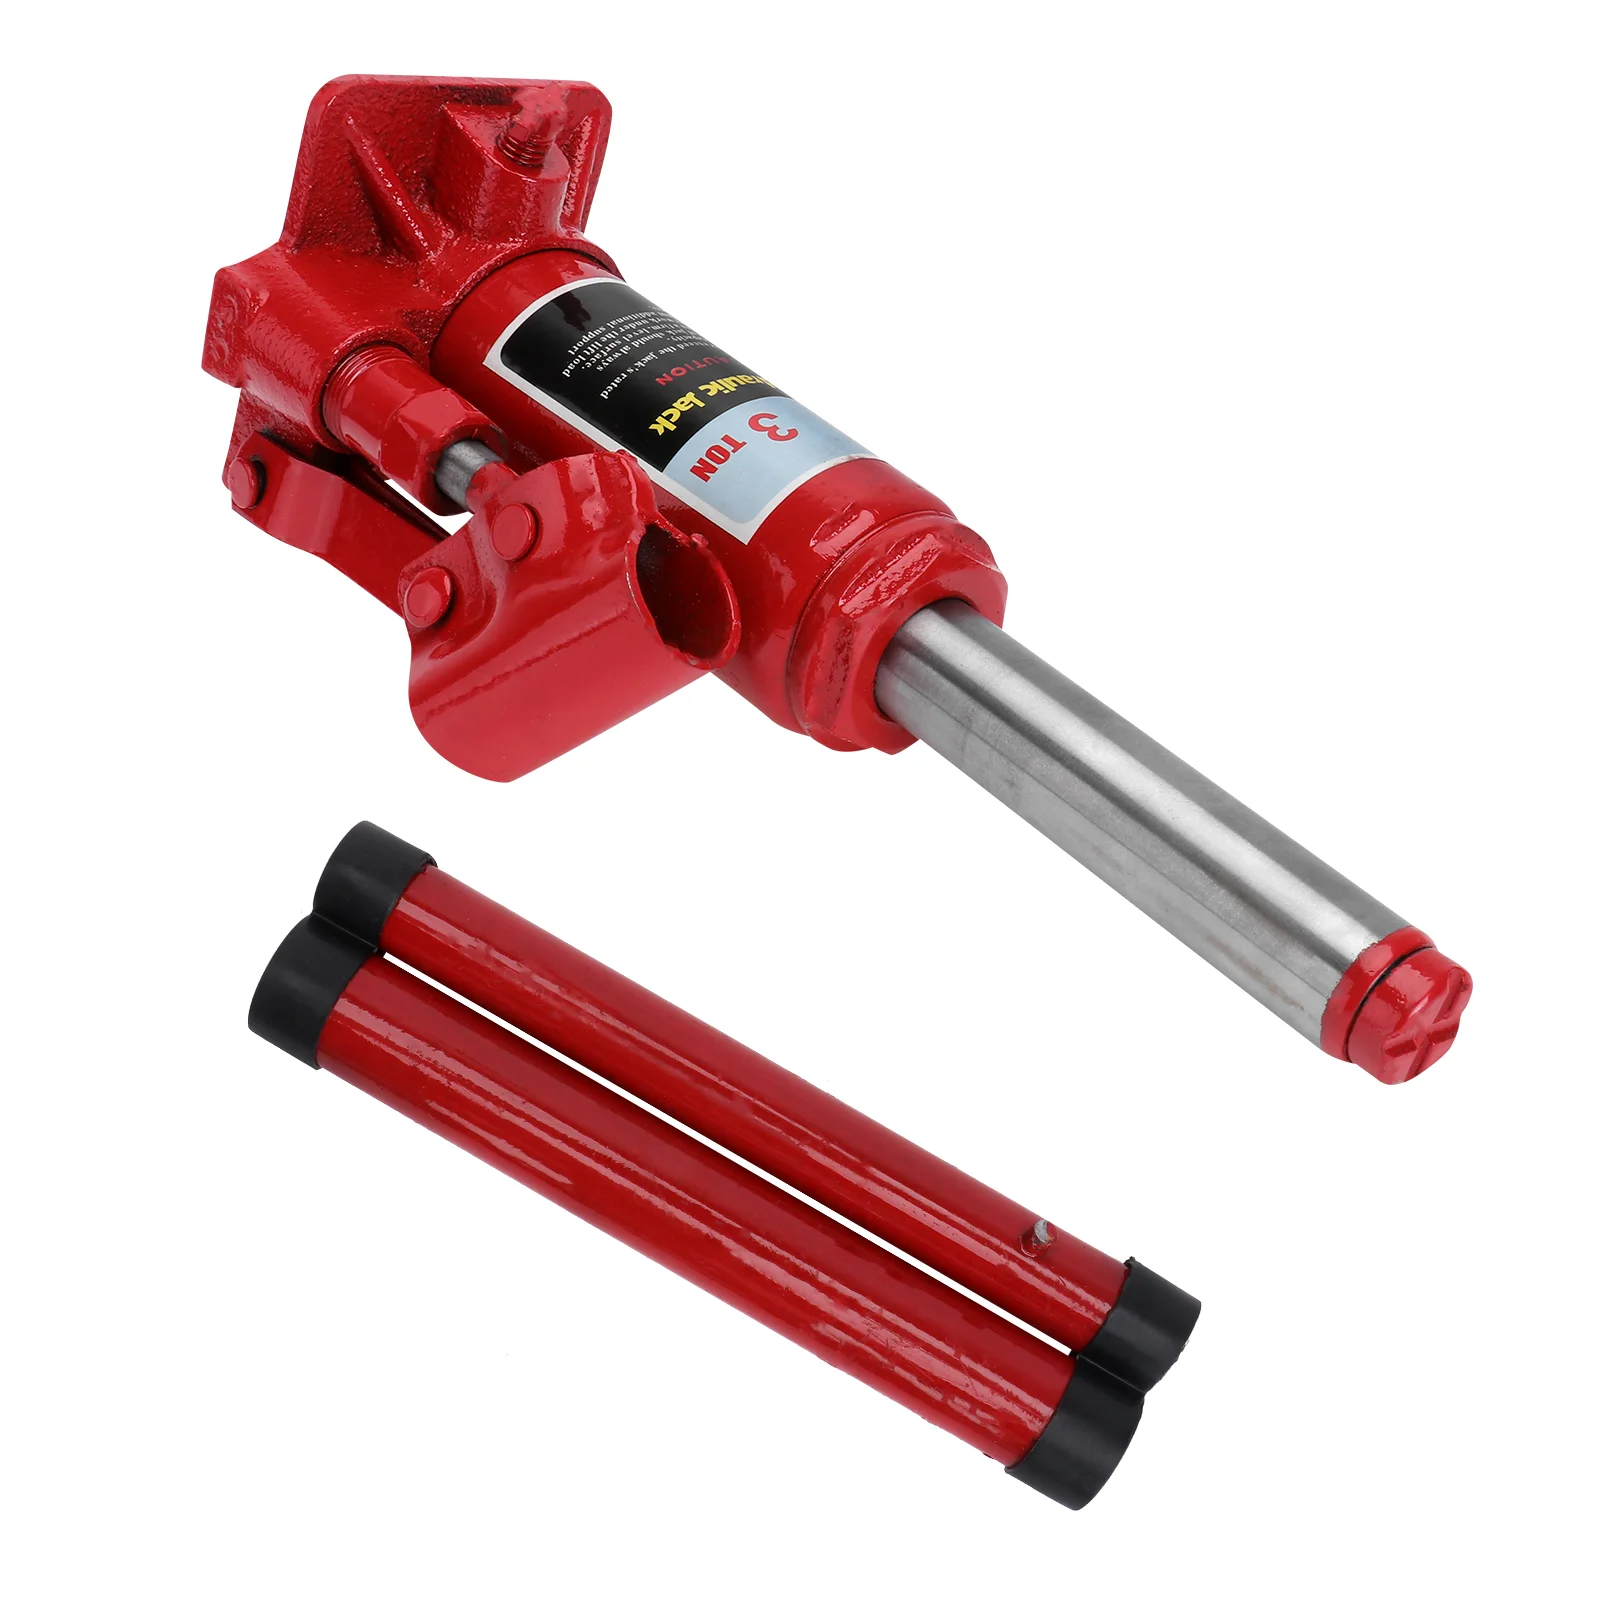 

3 Ton Car Sedan Car Oil Pressure Jack Car Auto Changing Tires Tools Home Use ( Red ) Hydraulic for